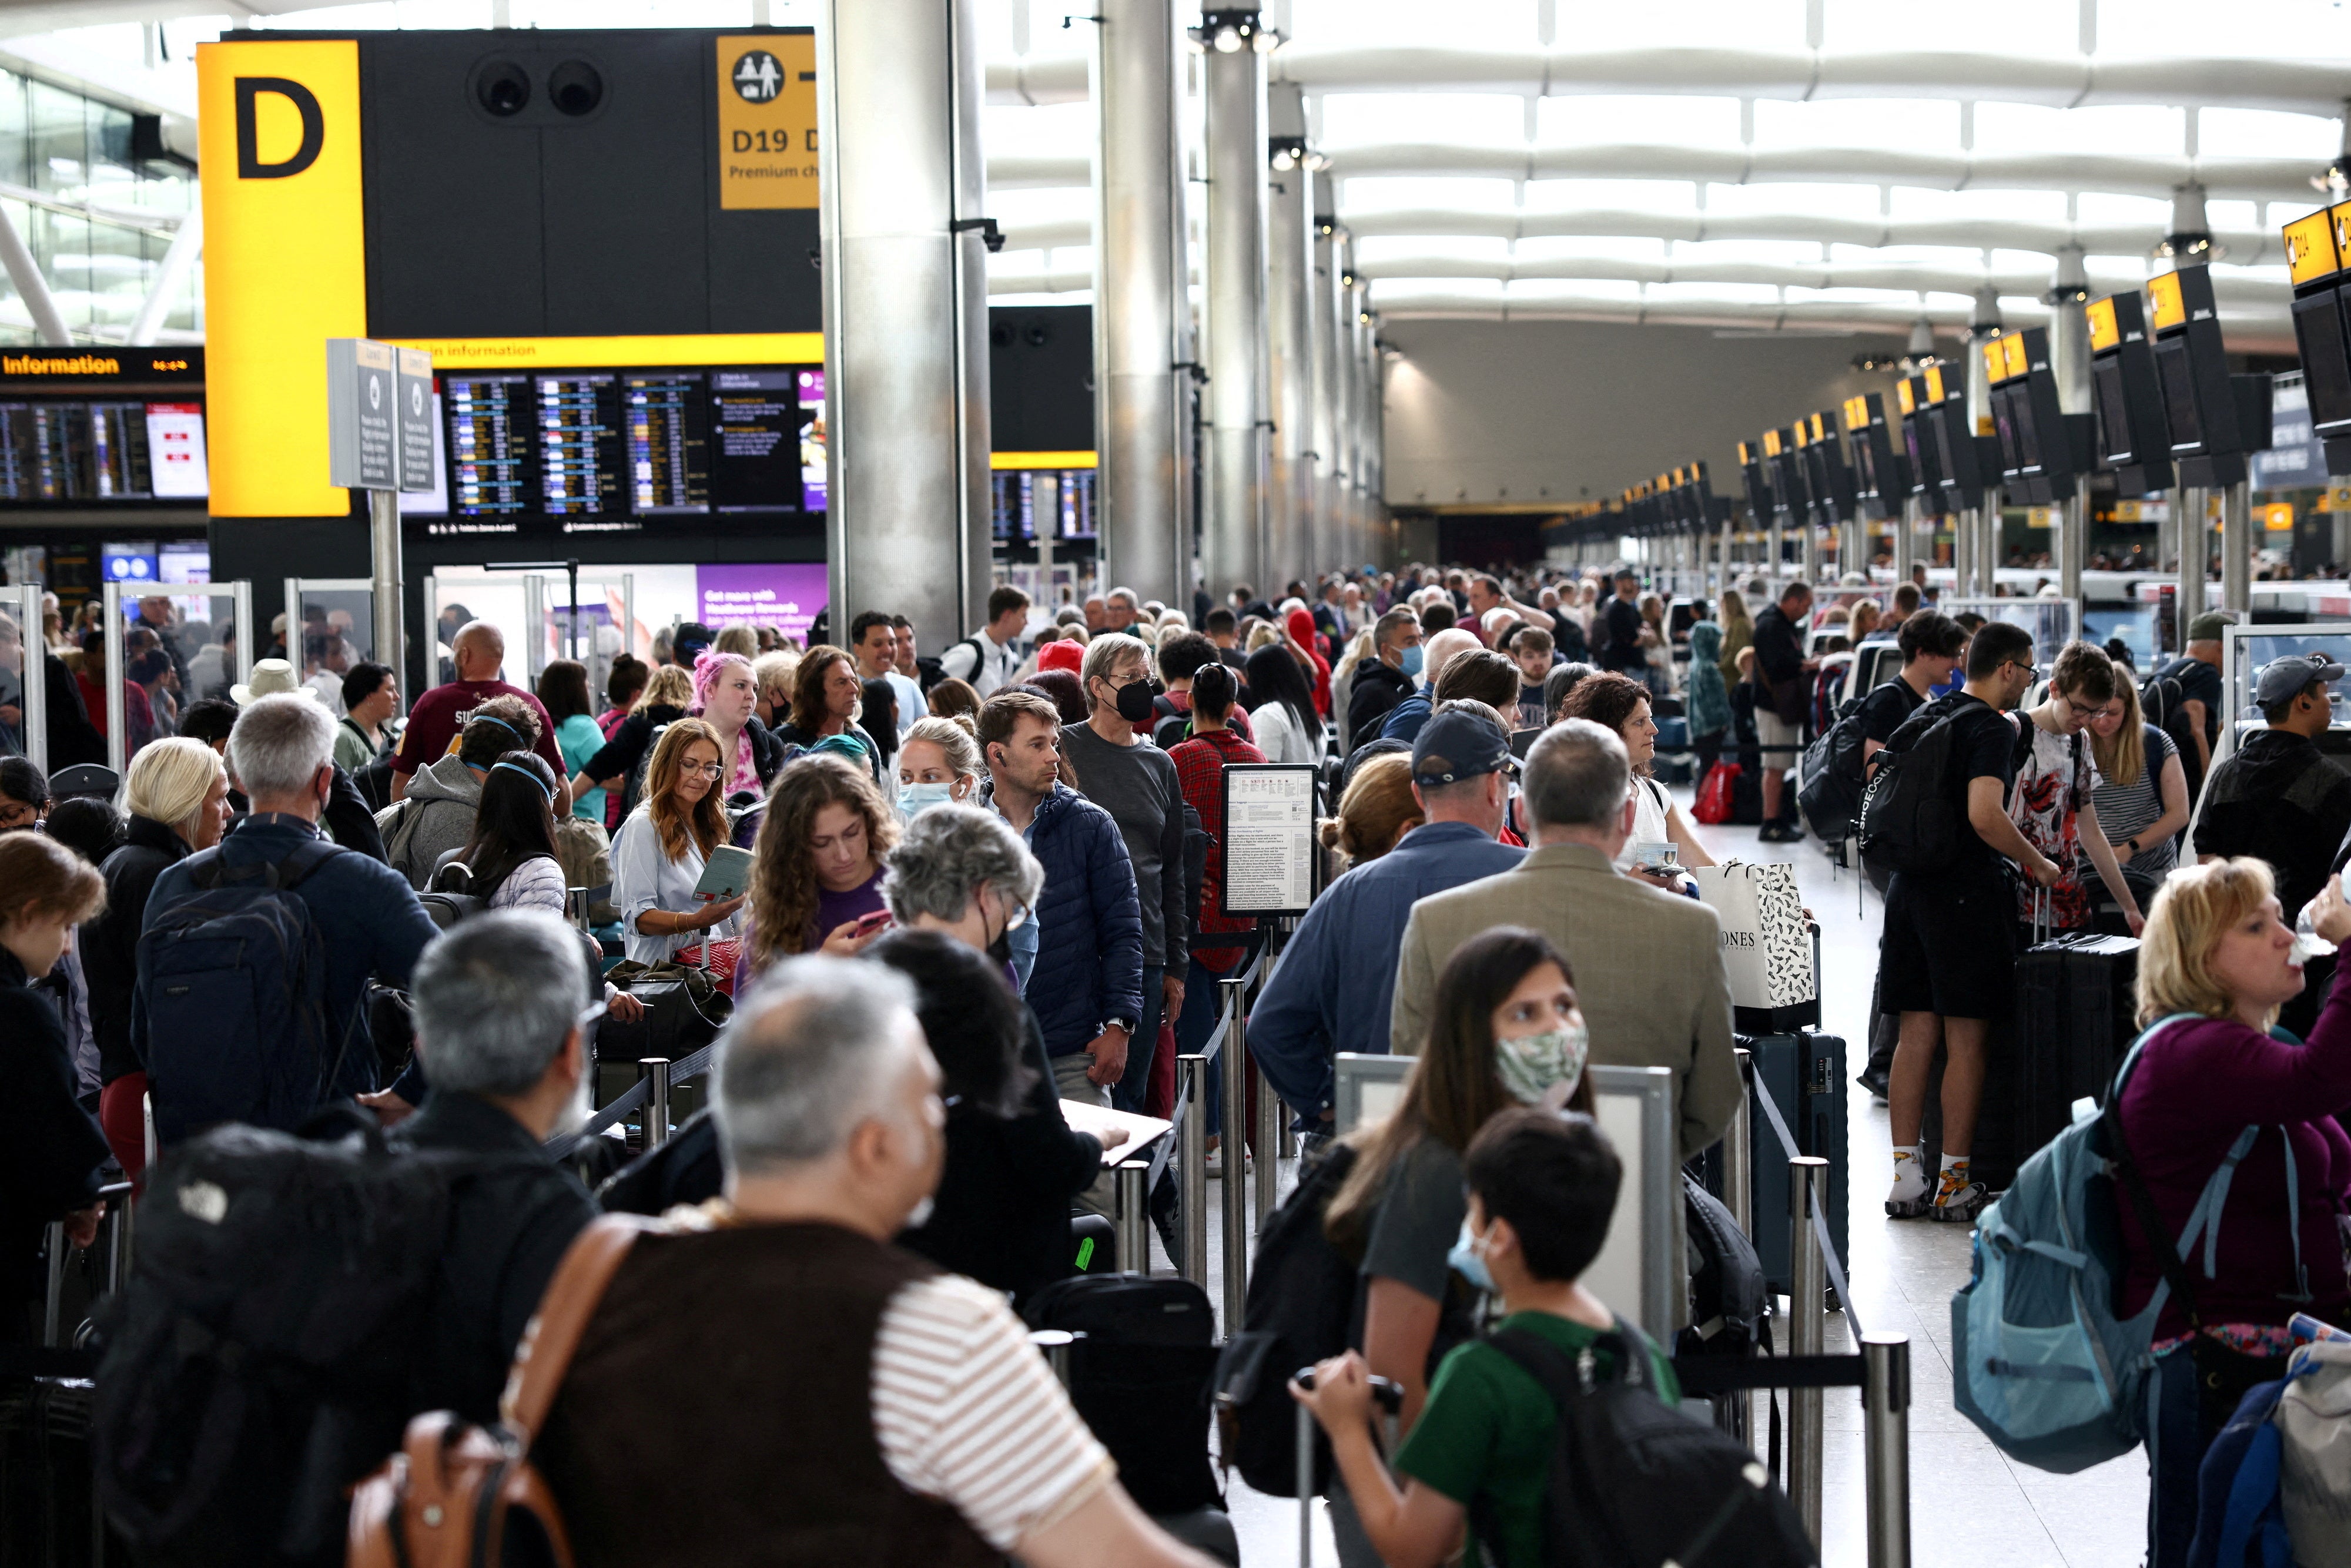 Passengers have been affected by delays at London Heathrow all summer